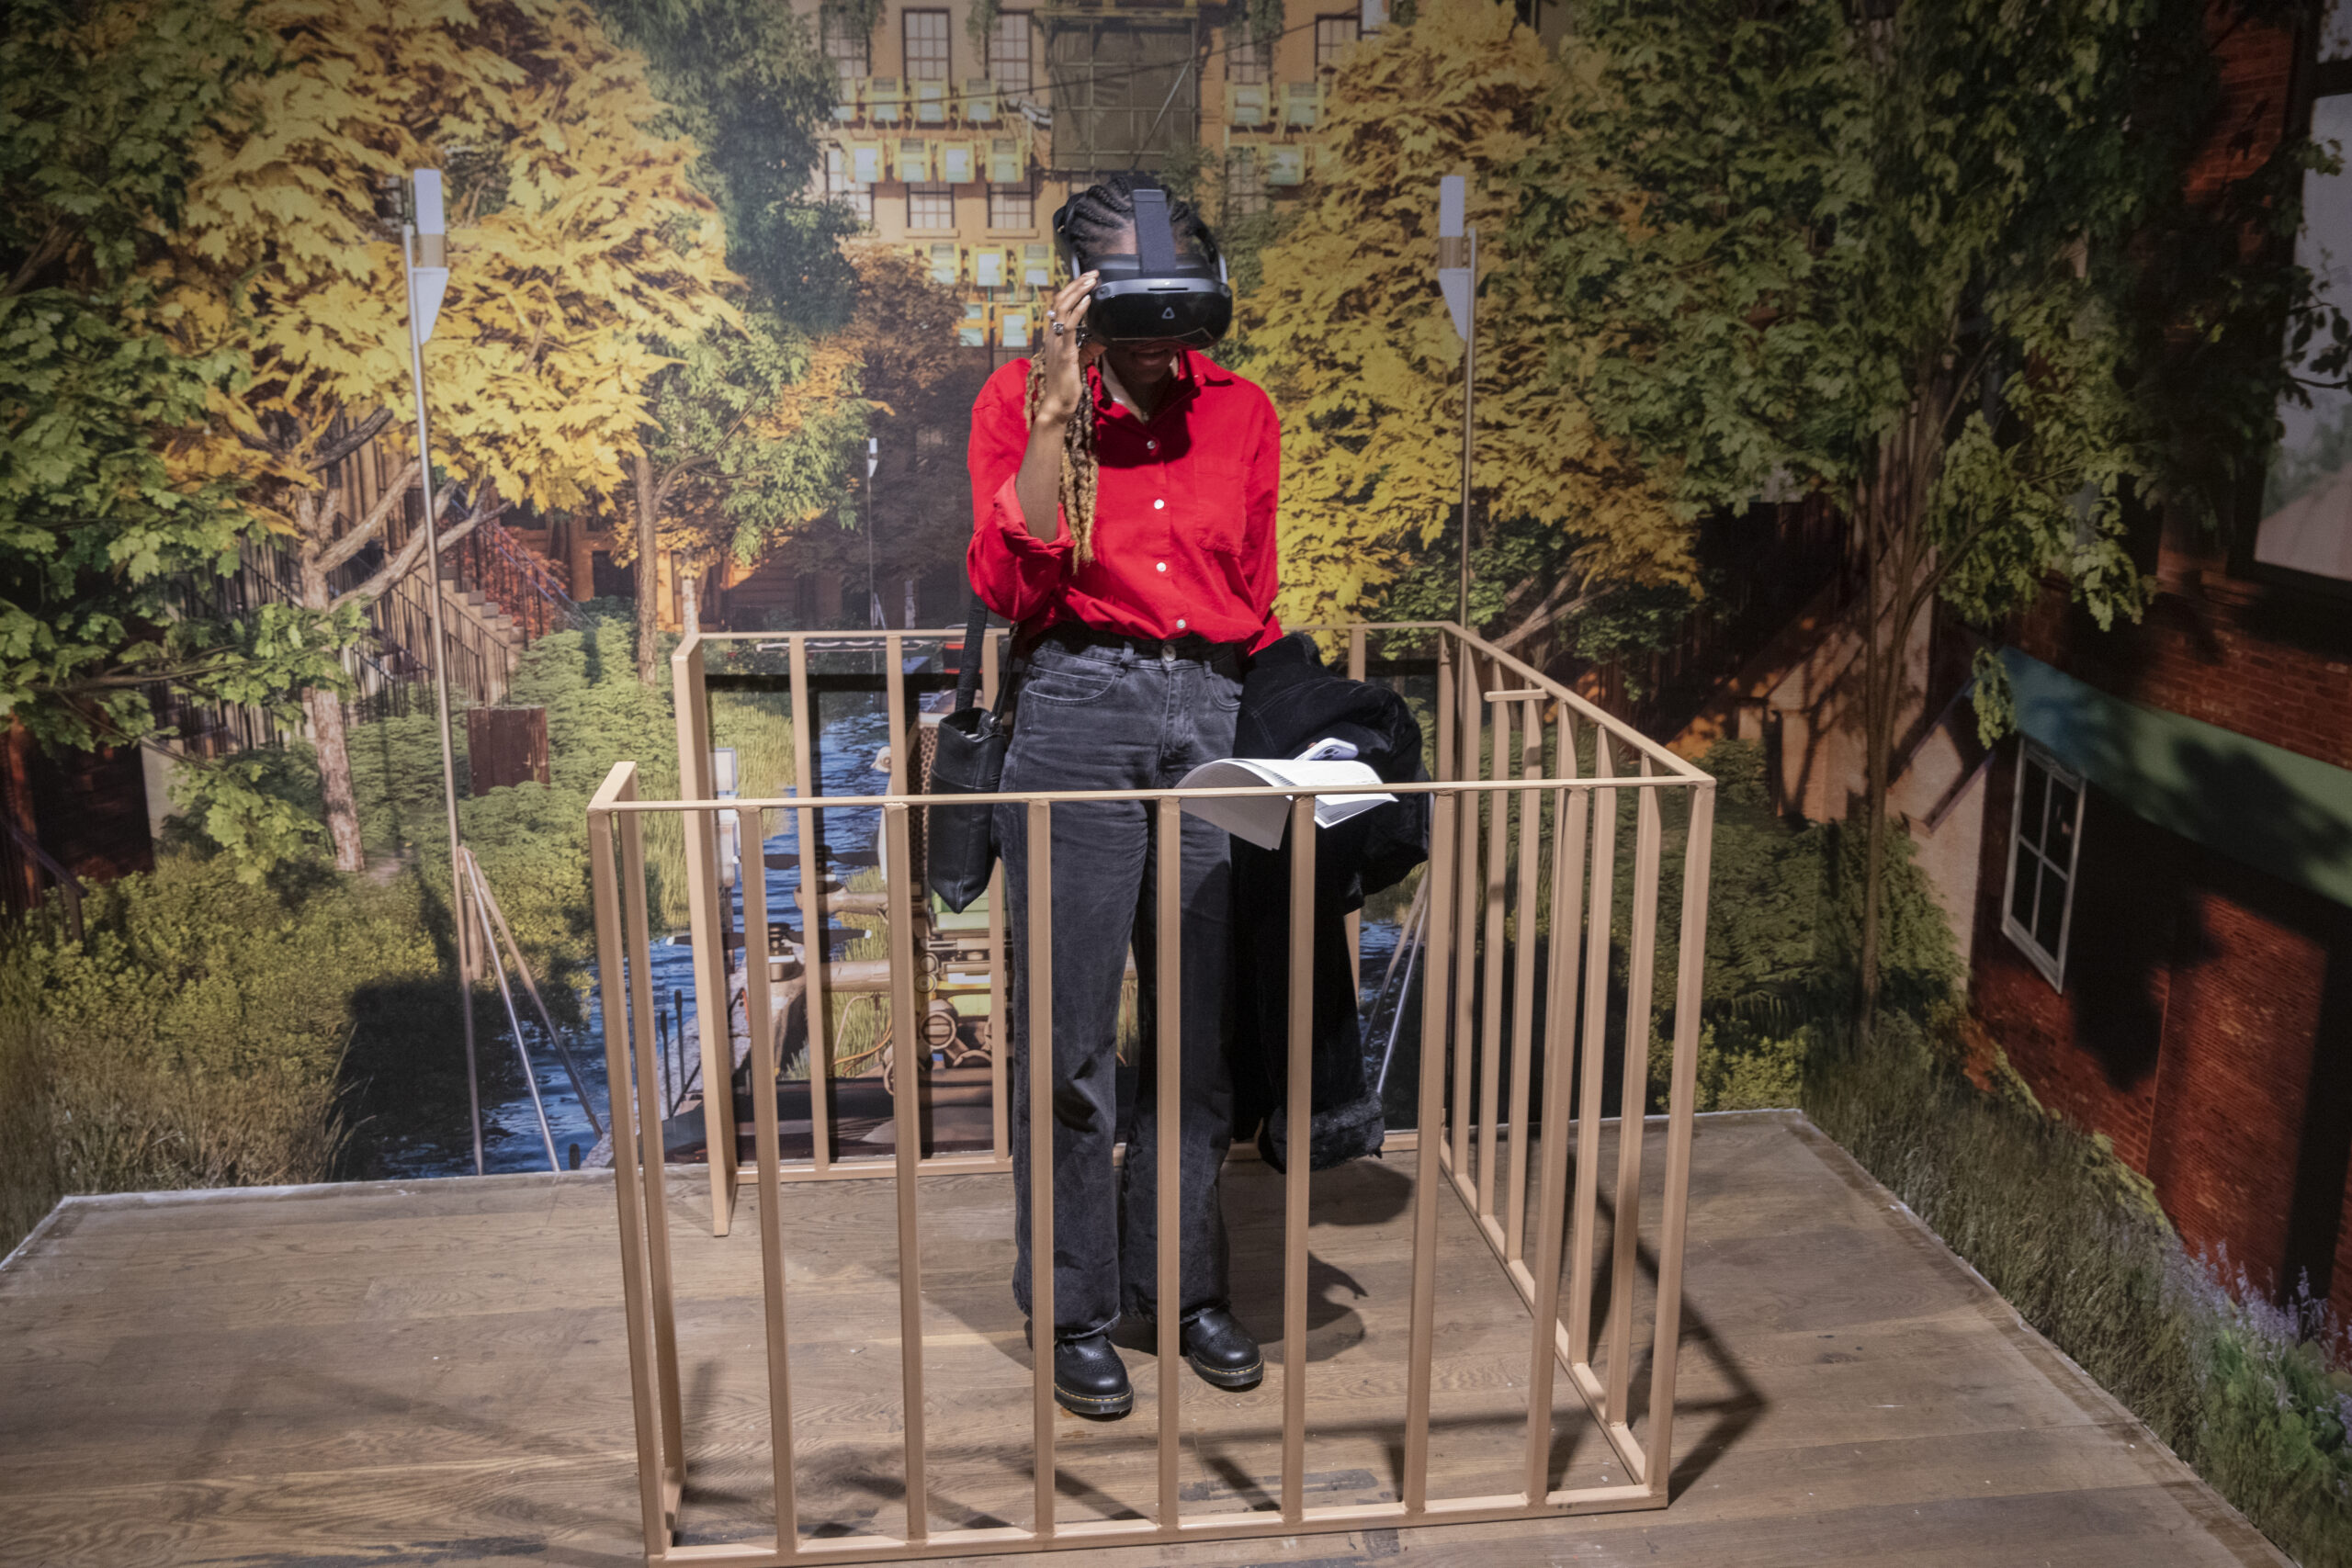 Adedoyin Olagbegi takes part in the VR portion of the exhibit at Climate Futurism panel.